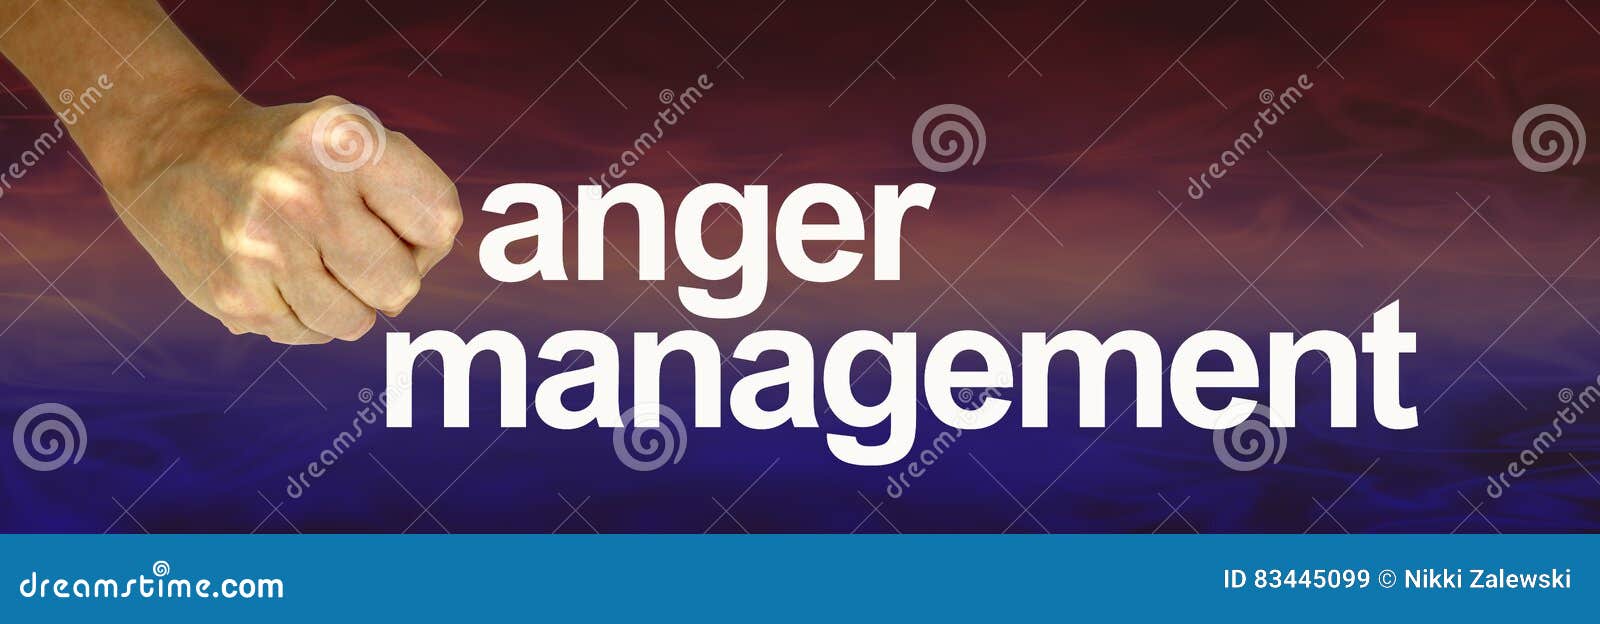 anger management hot to cool banner